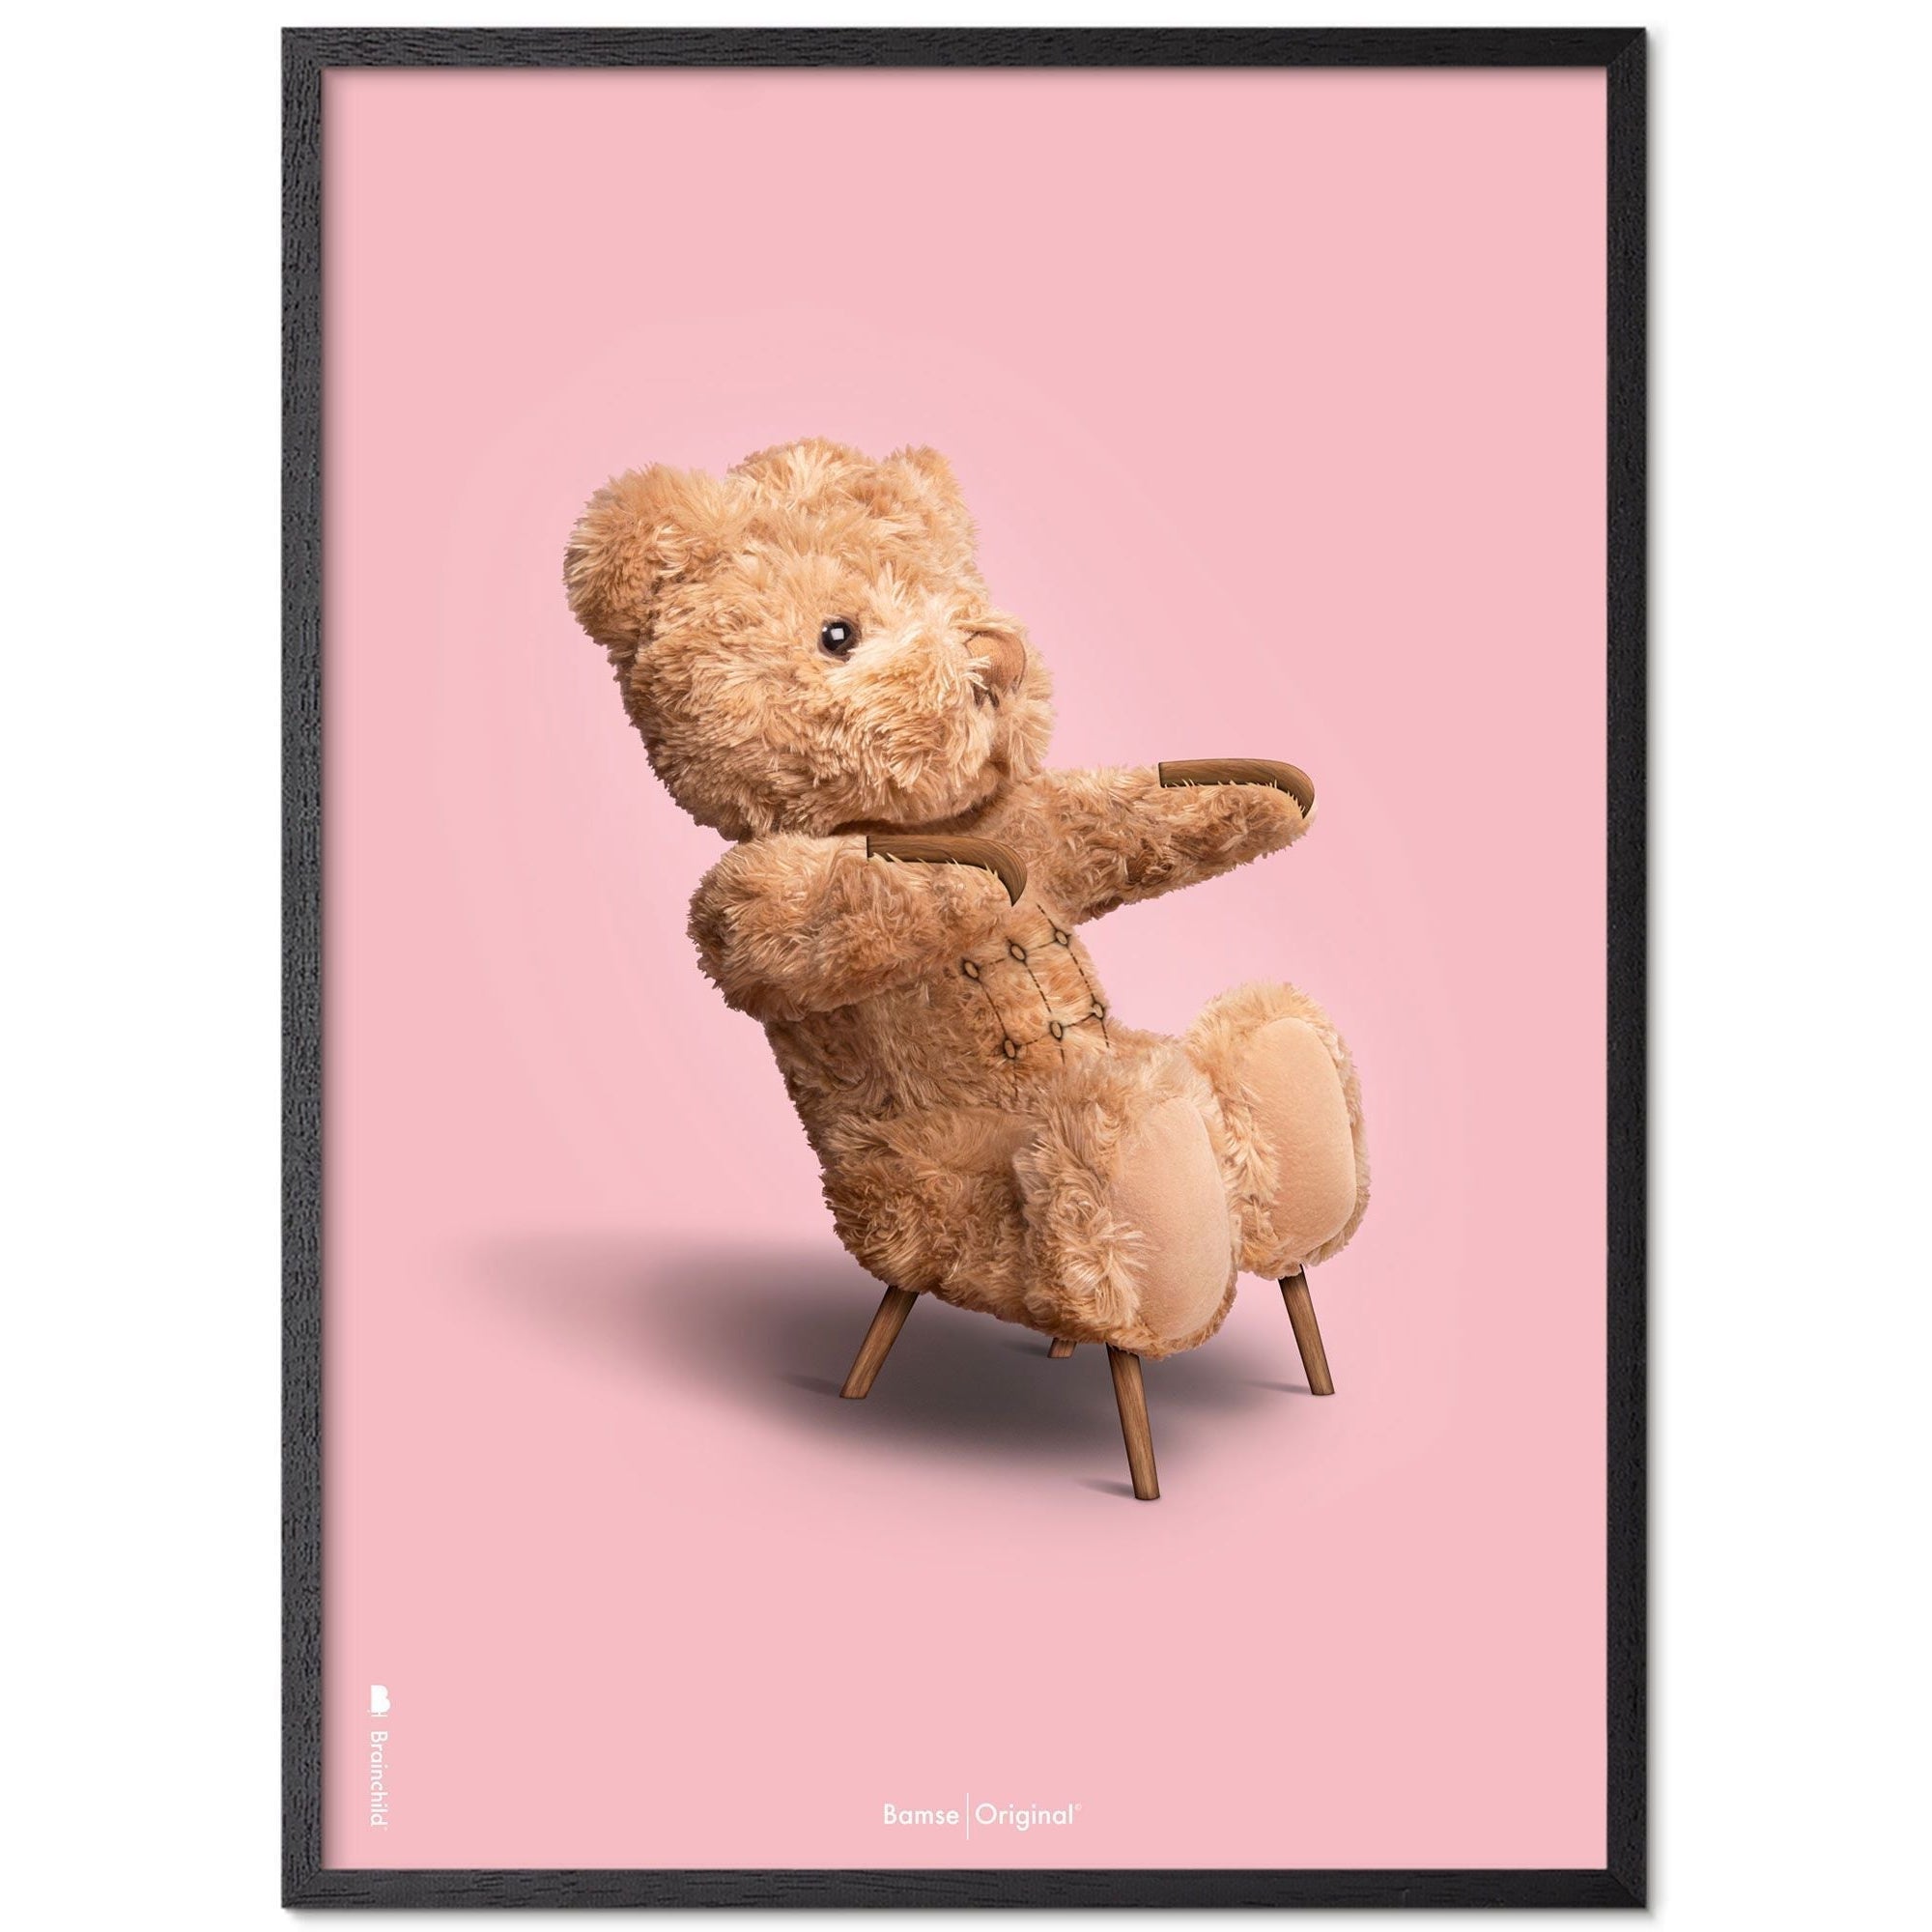 Brainchild Teddy Bear Classic Poster Frame in Black Lacquered Wood A5, Pink baggrund